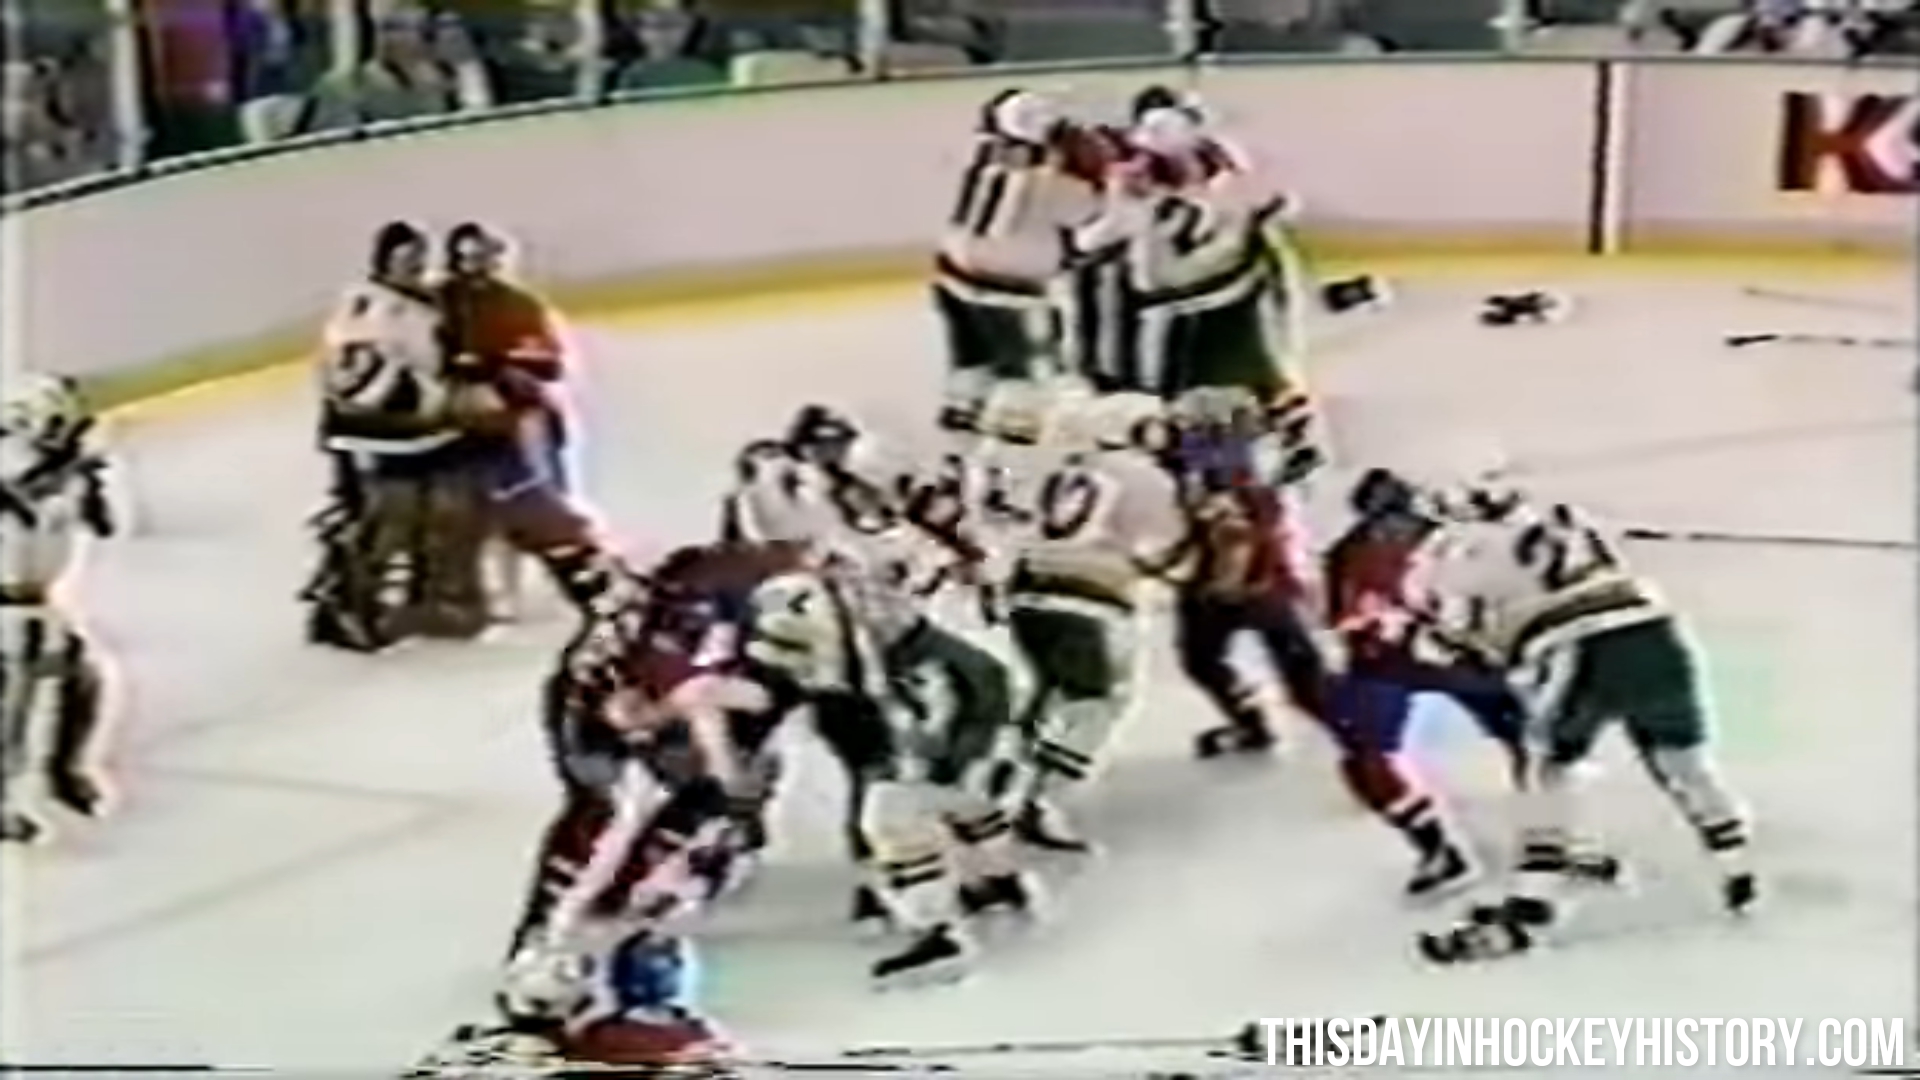 This Day In Hockey History-March 12, 1984-Kent Carlson vs Paul Holmgren & North Stars vs Canadiens Bench Clearing Brawl